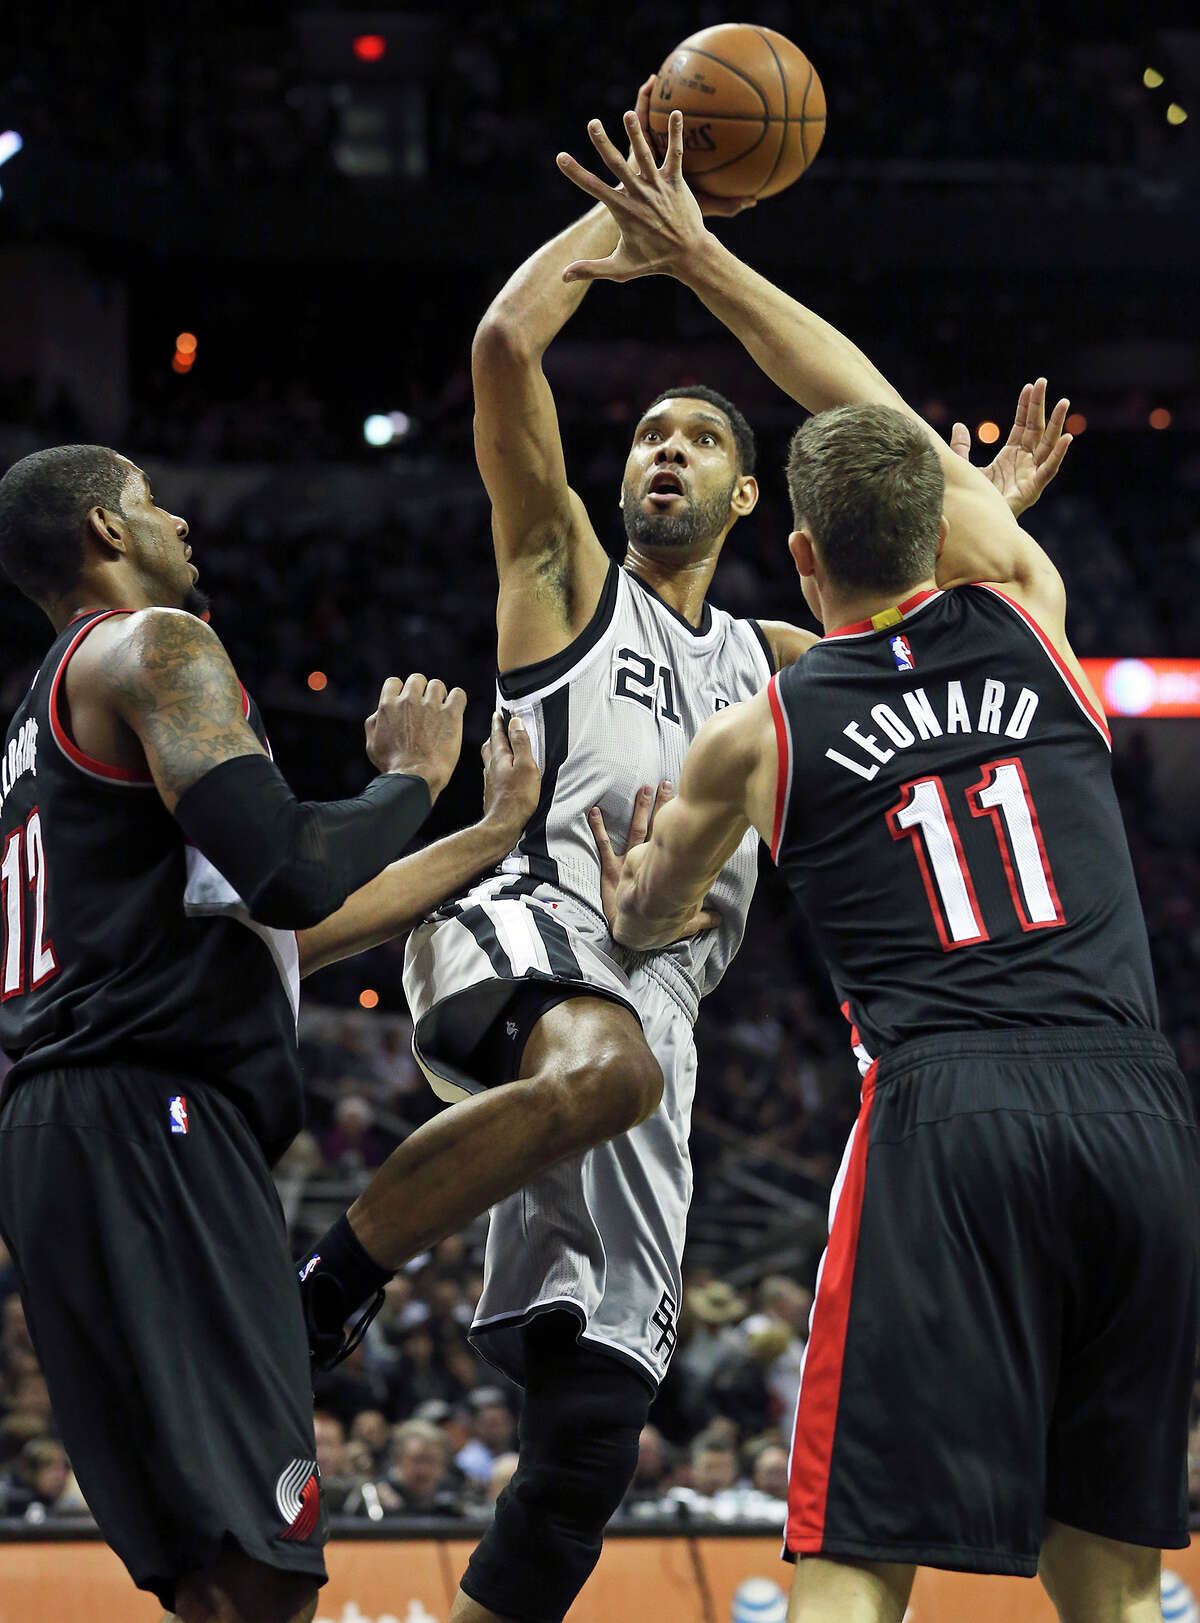 Tim Duncan falls back for a shot in the lane as the Spurs play the Portland Trailblazers at the AT&T Center on January 16, 2015.